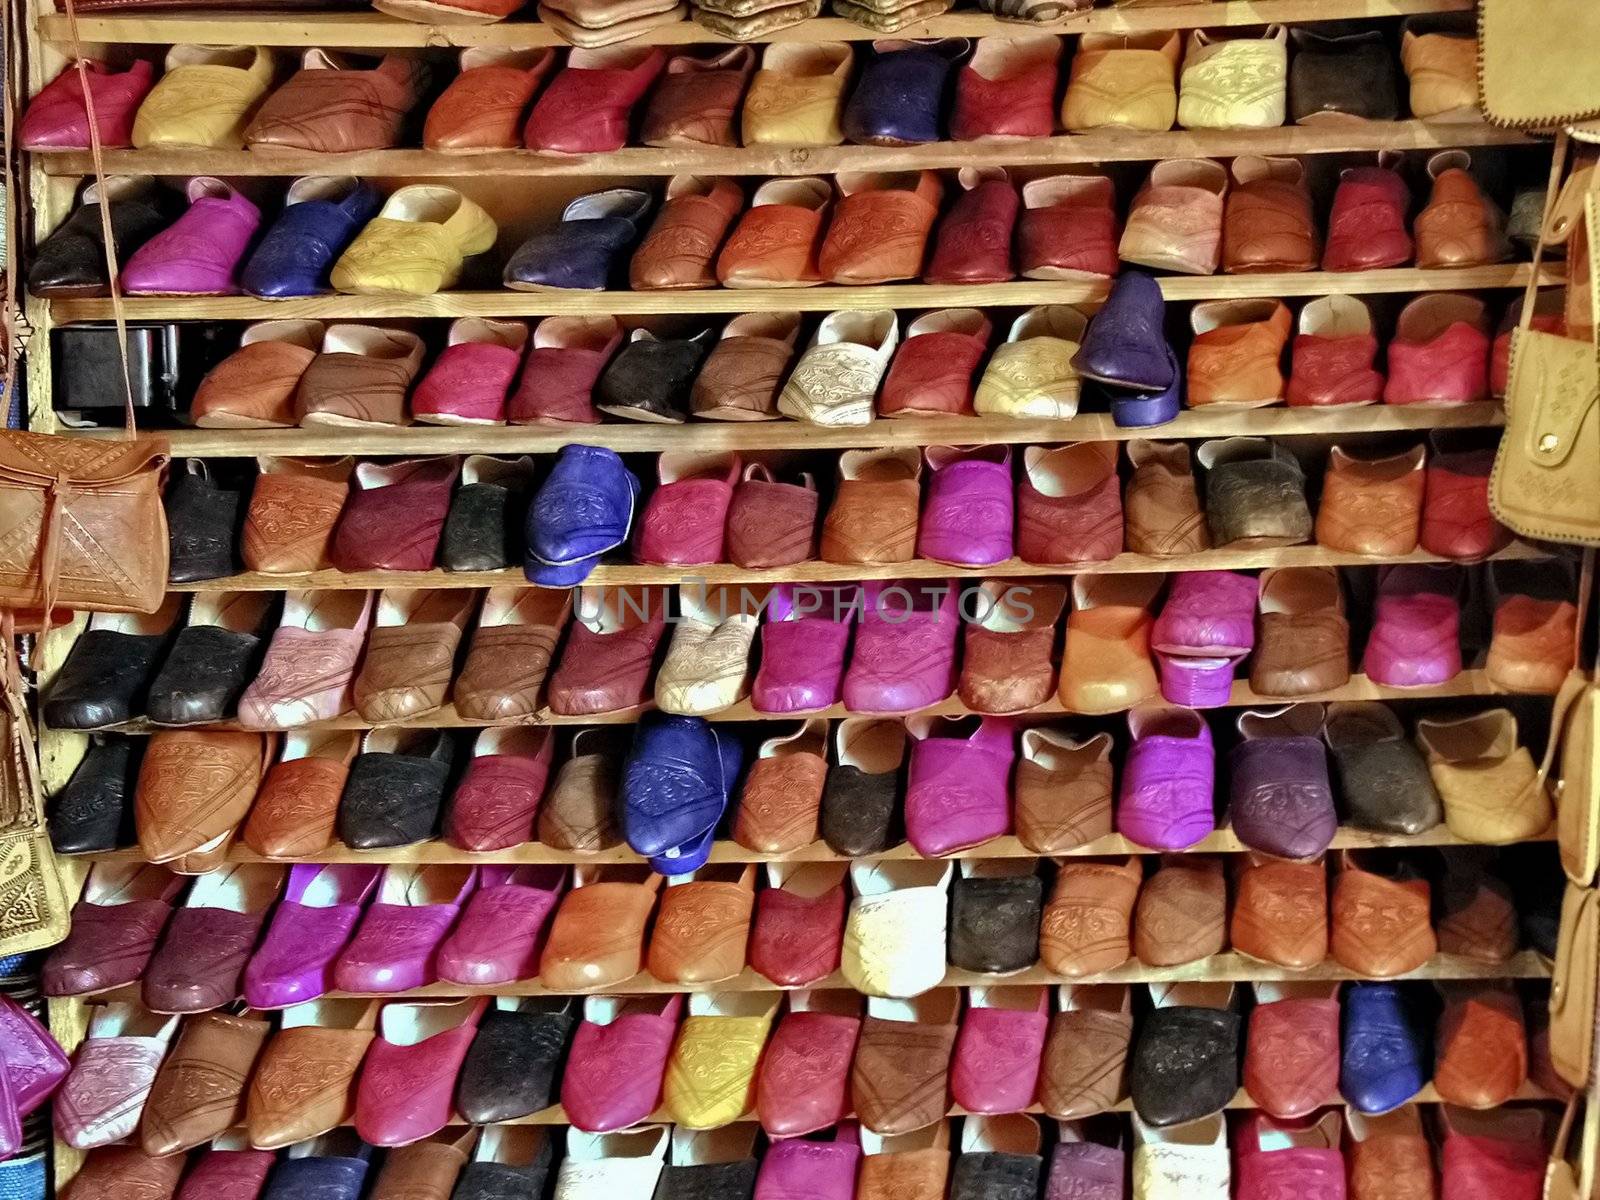 Colorful Shoes For Sale In Marrakech by rigamondis